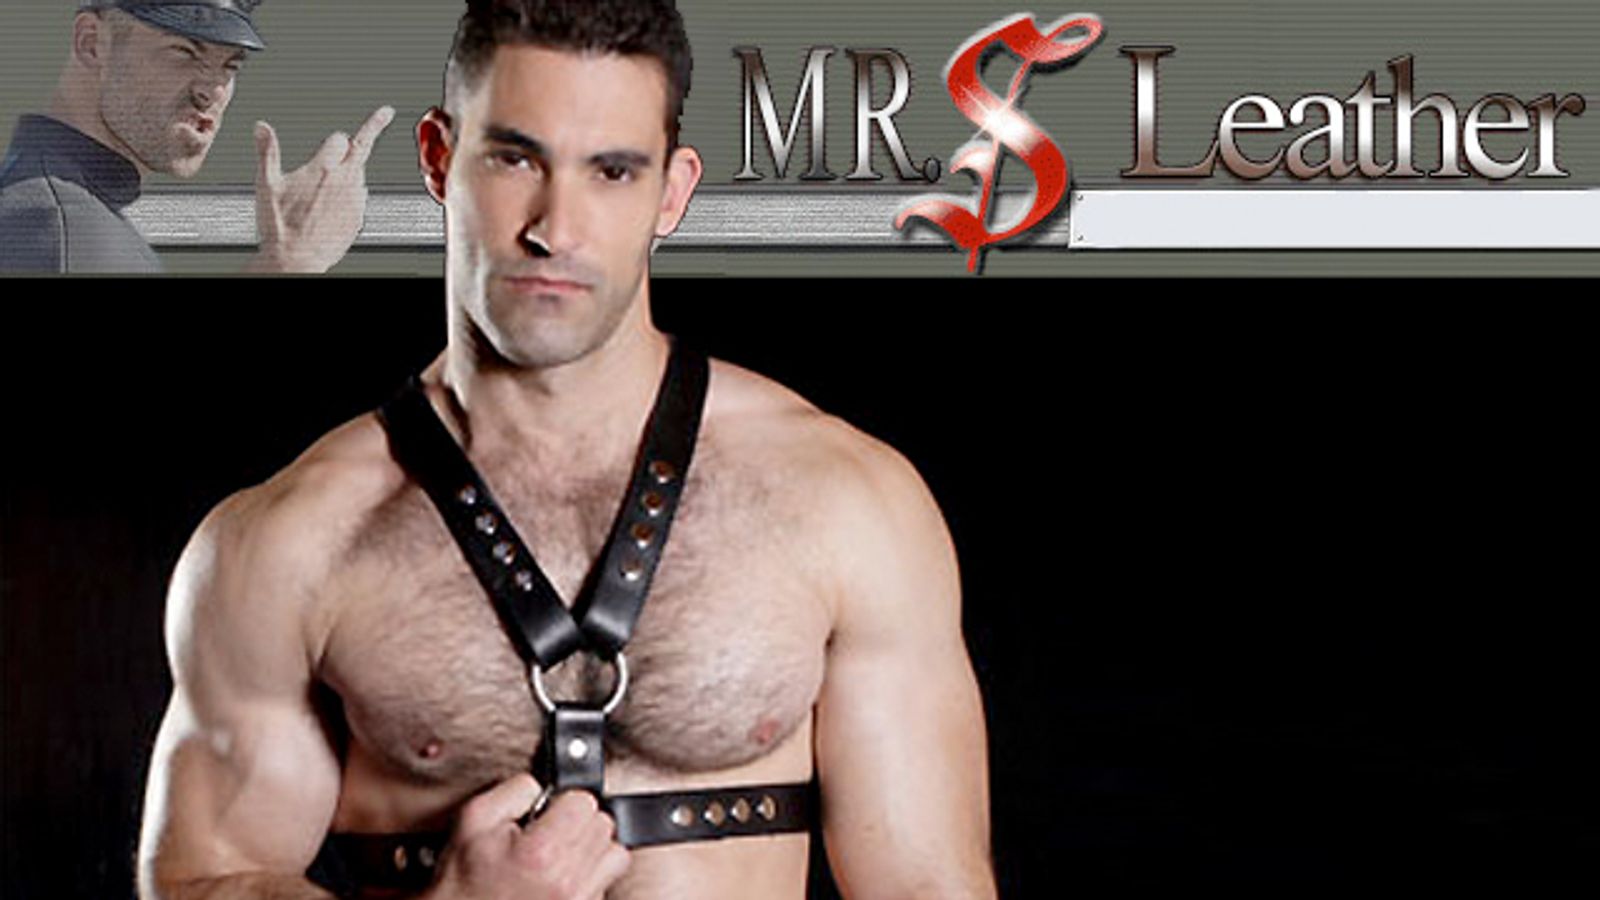 Mr. S Leather Expands Wholesale Operation